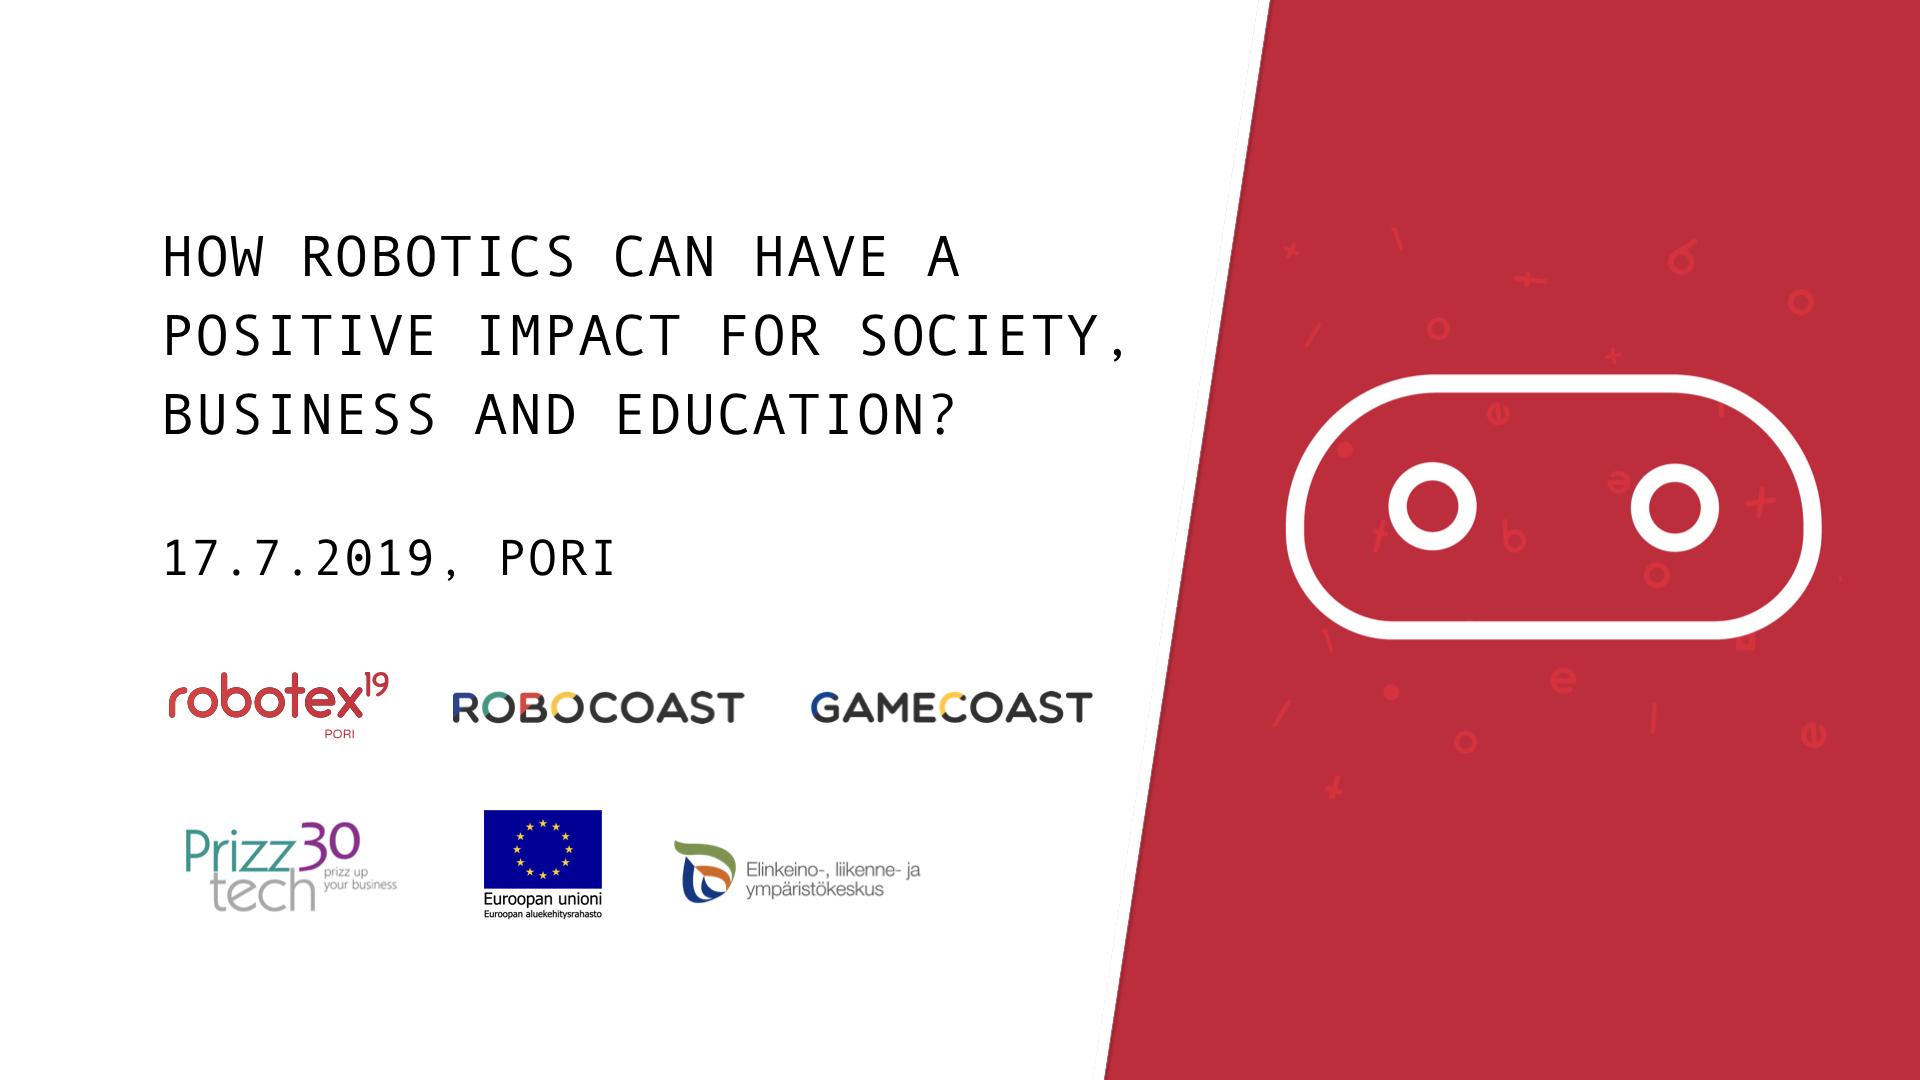 17.7.2019 – How Robotics Can Have a Positive Impact  for Society, Business and Education? (Pori)